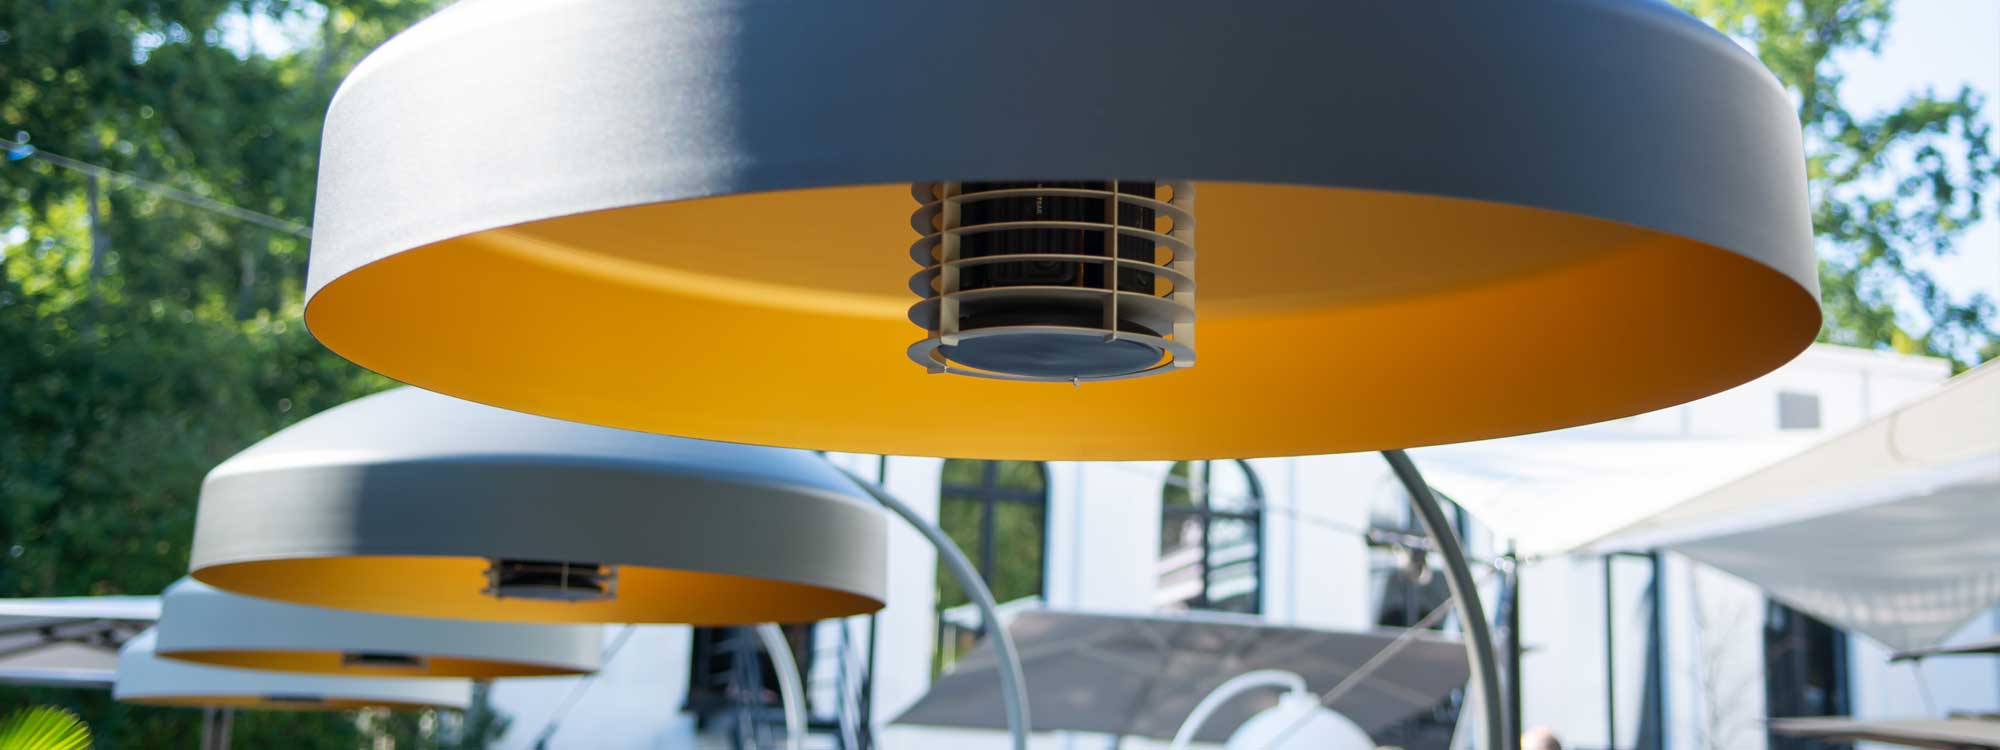 Image of Disc heater's golden hood interior by Heatsail FAR infrared heating company